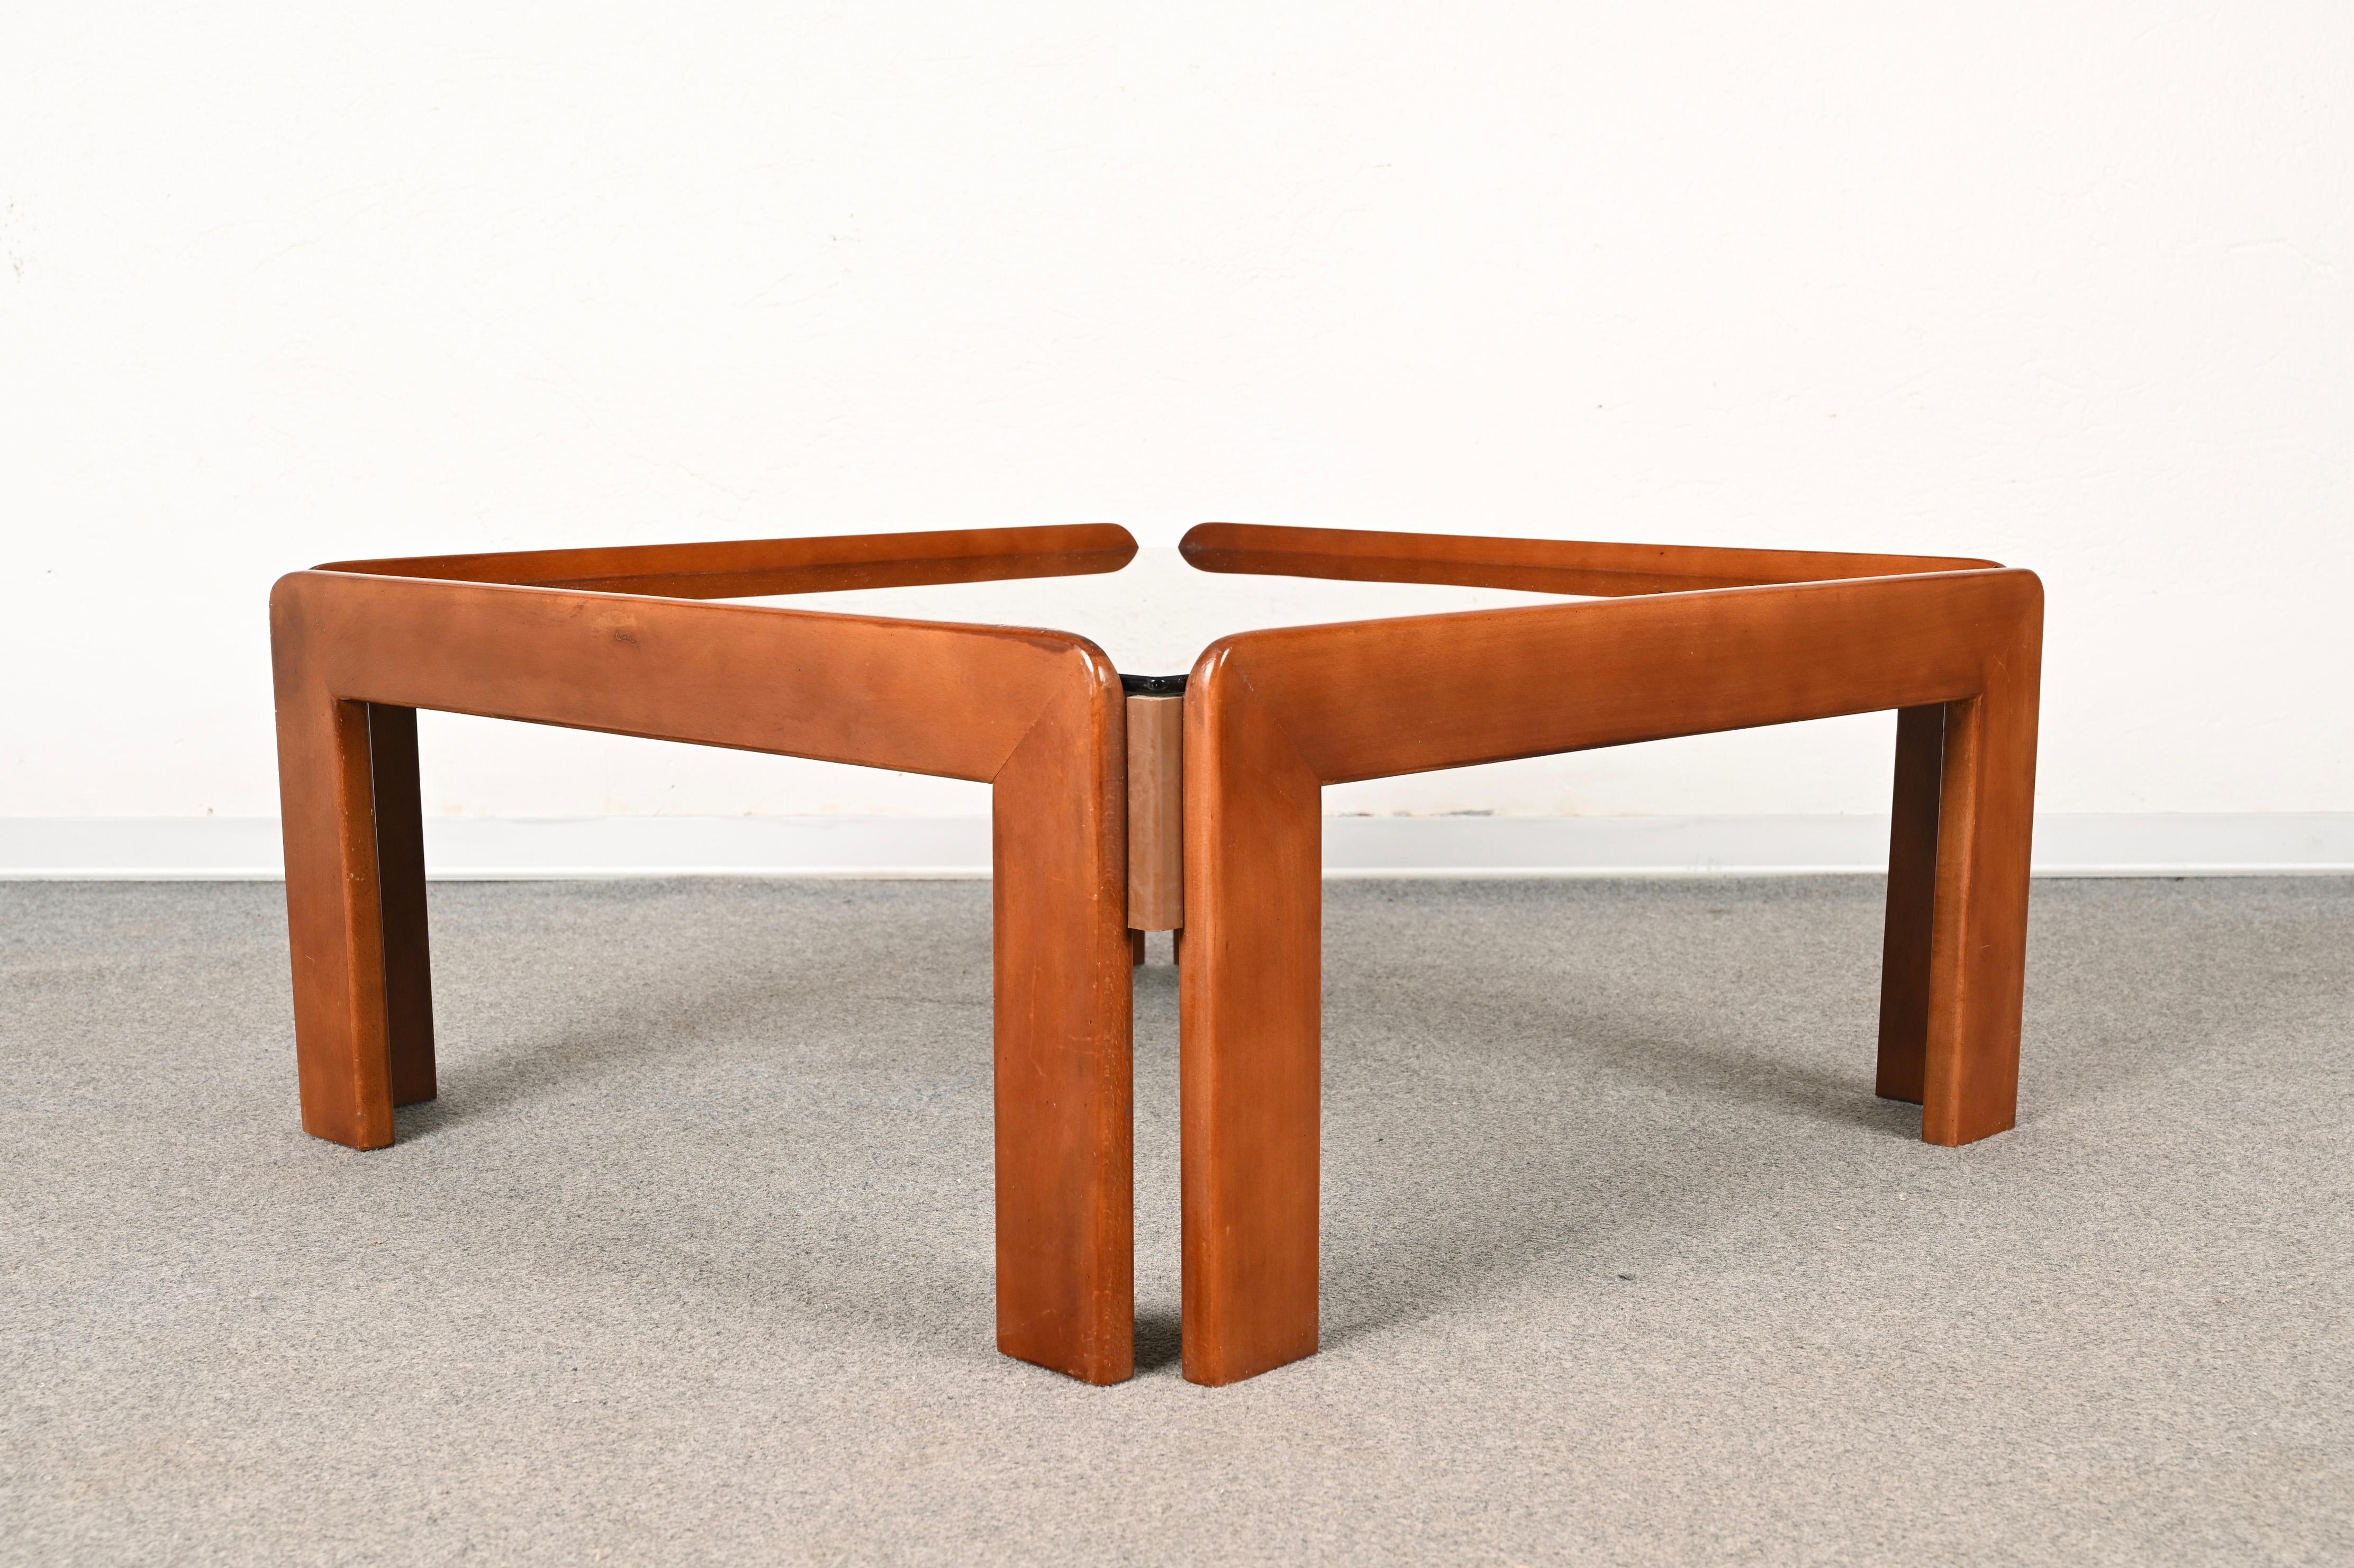 Afra & Tobia Scarpa Midcentury Wood Squared Italian Coffee Table, 1960s For Sale 9